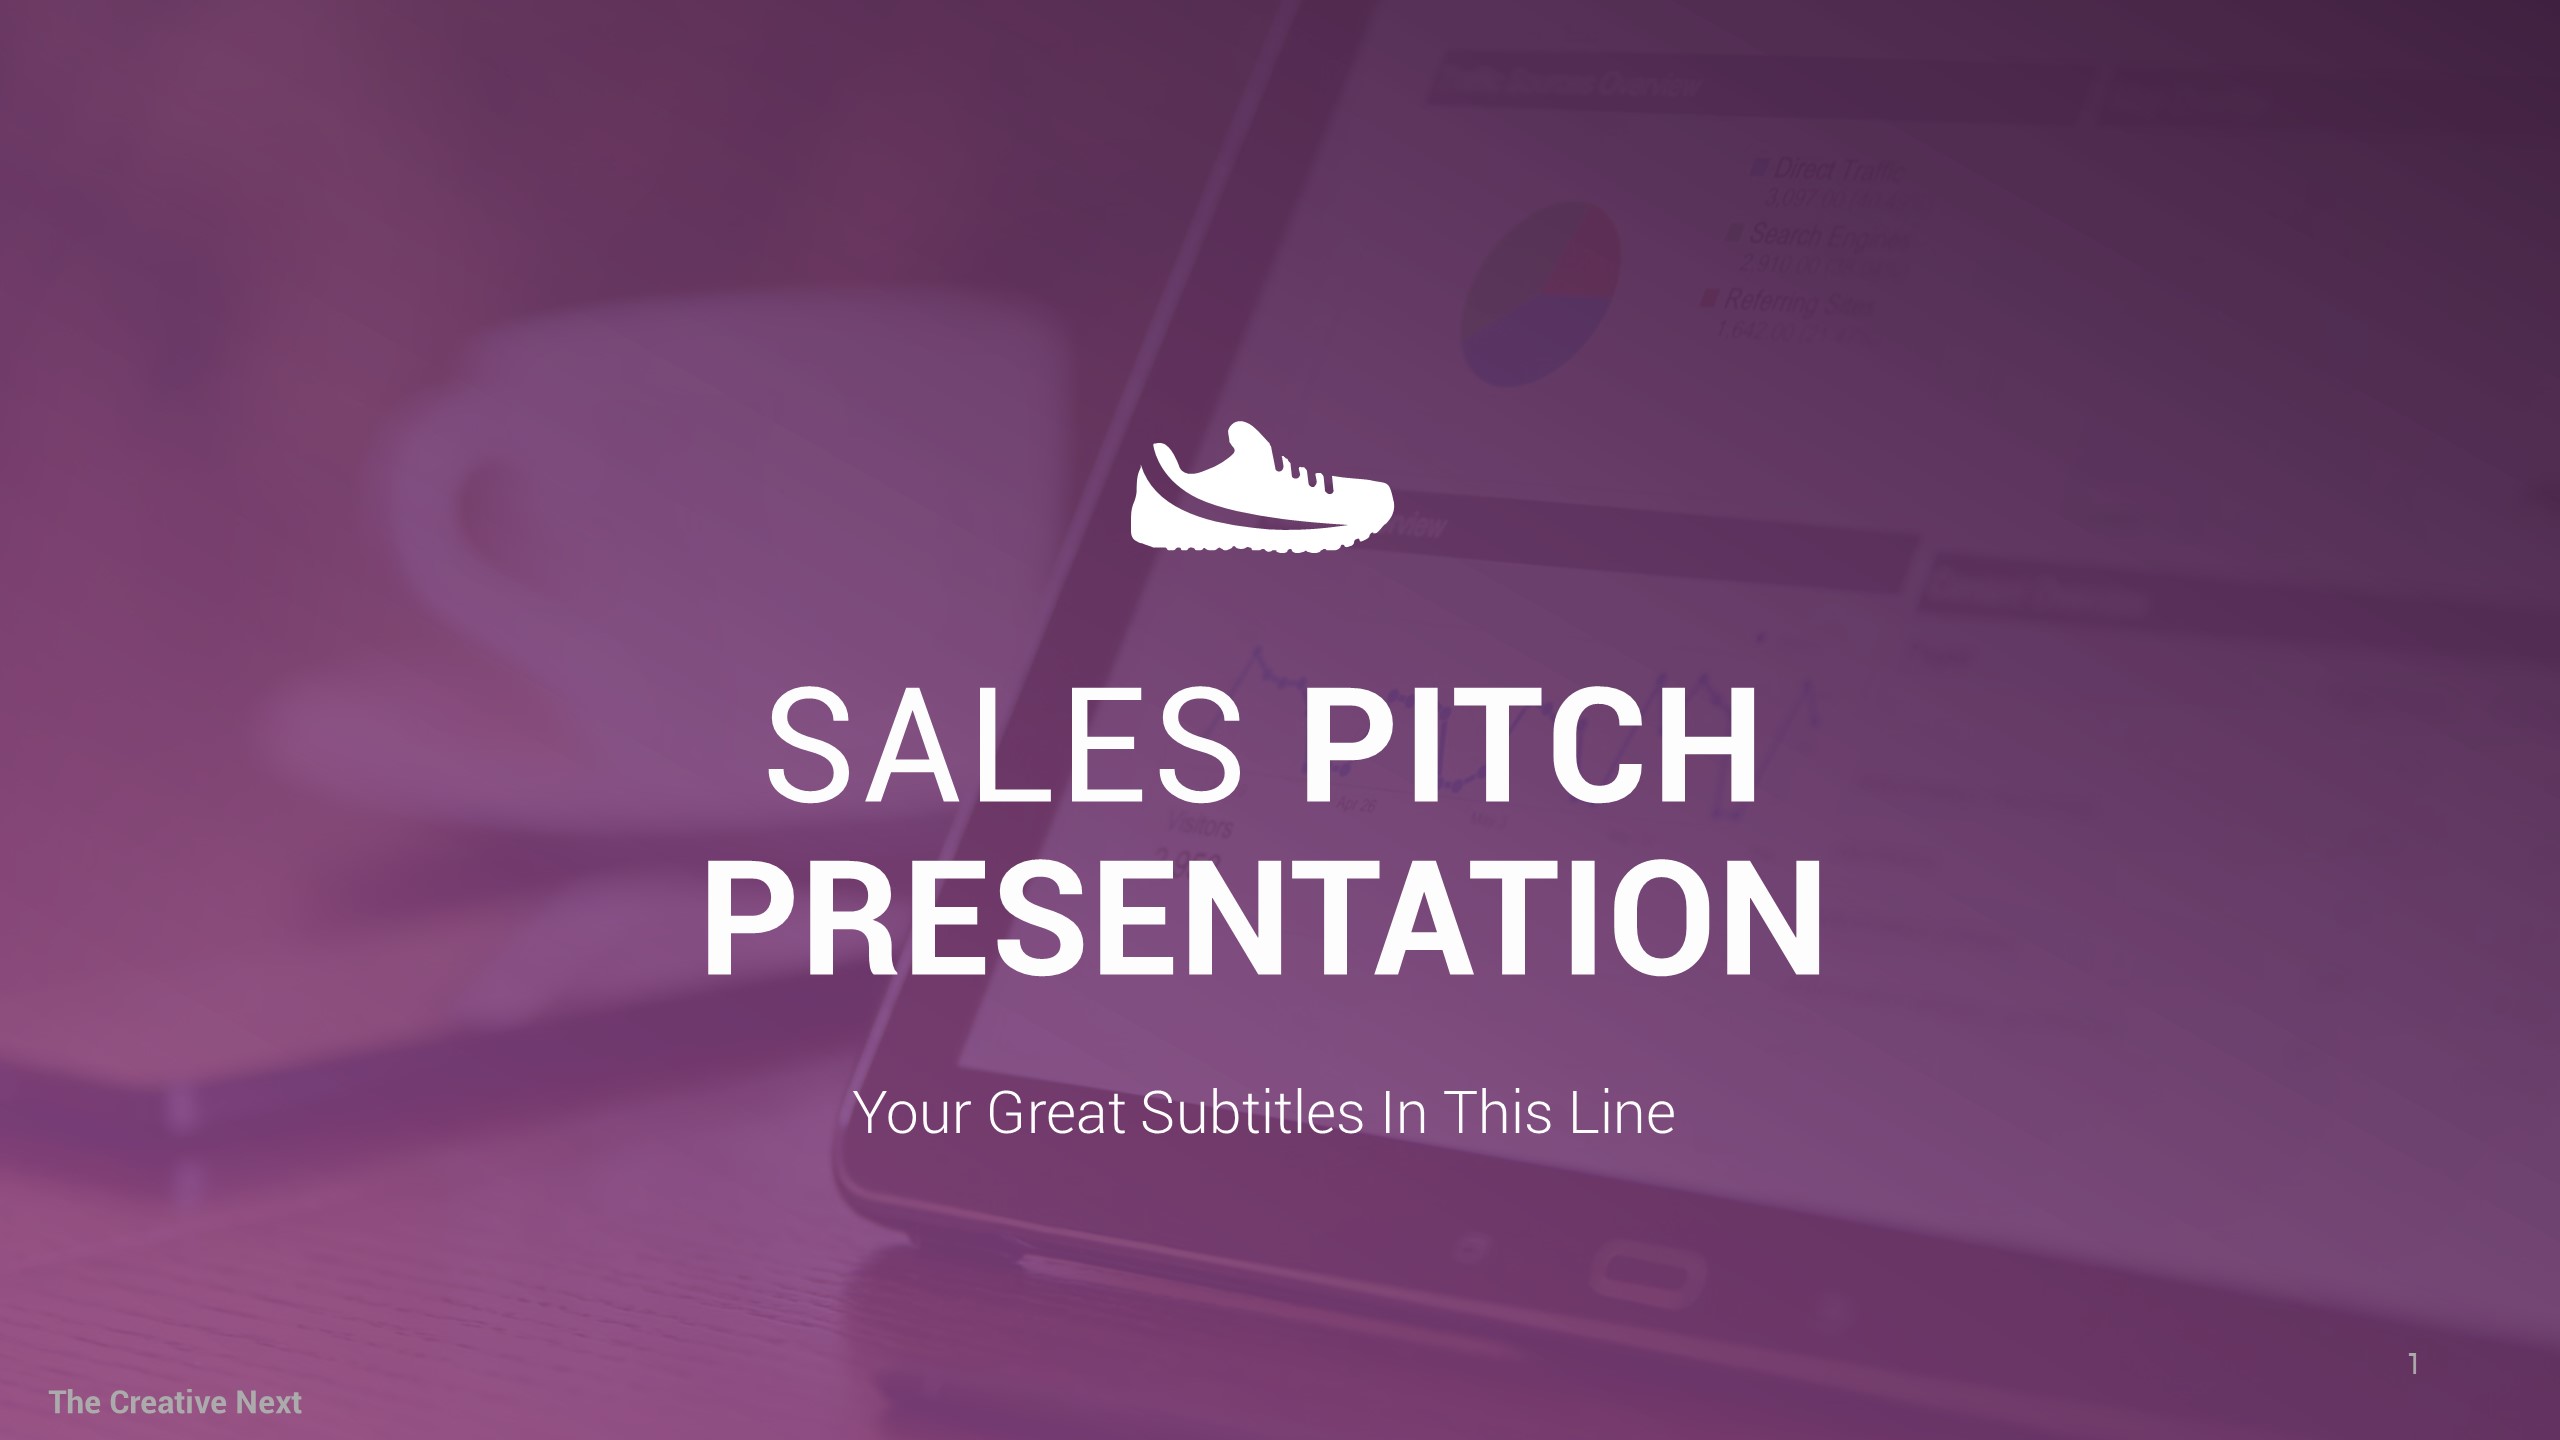 Sales Presentation - Professional Sales Pitch Template by Presentations